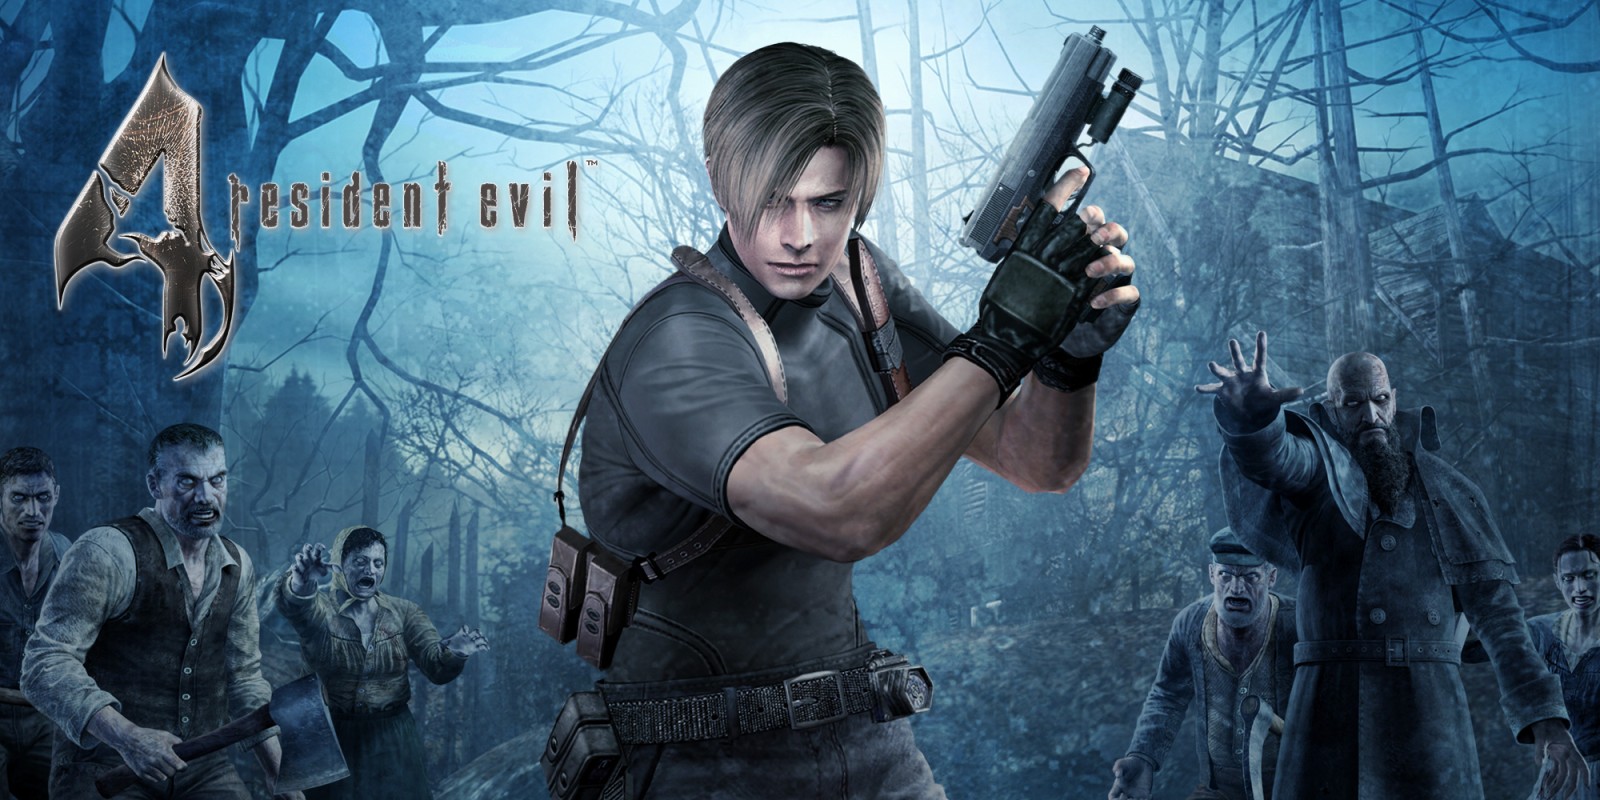 H2x1_NSwitchDS_ResidentEvil4_image1600w